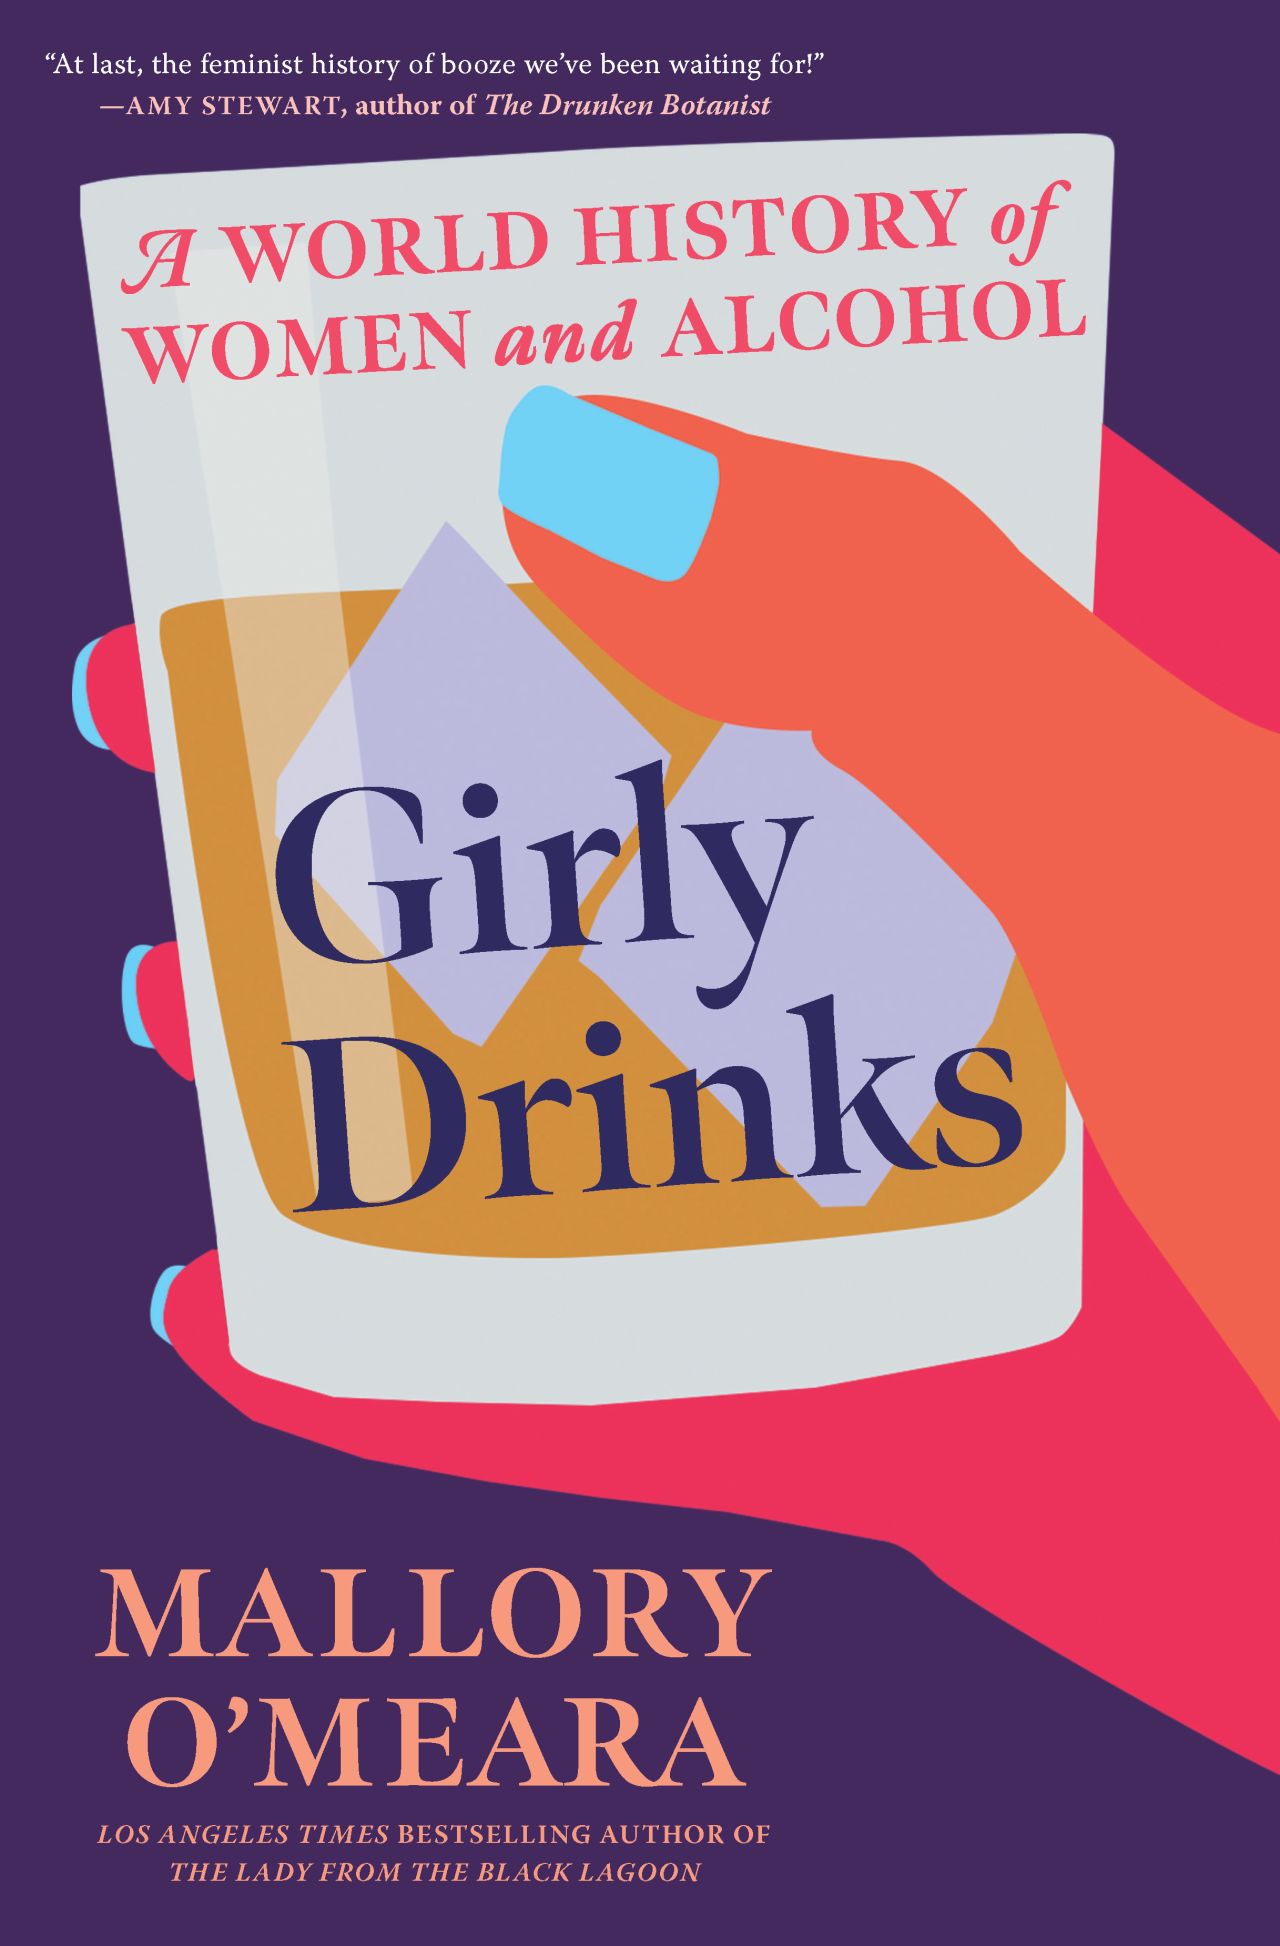 "Girly Drinks" examines how women have been the backbone of the alcohol industry.